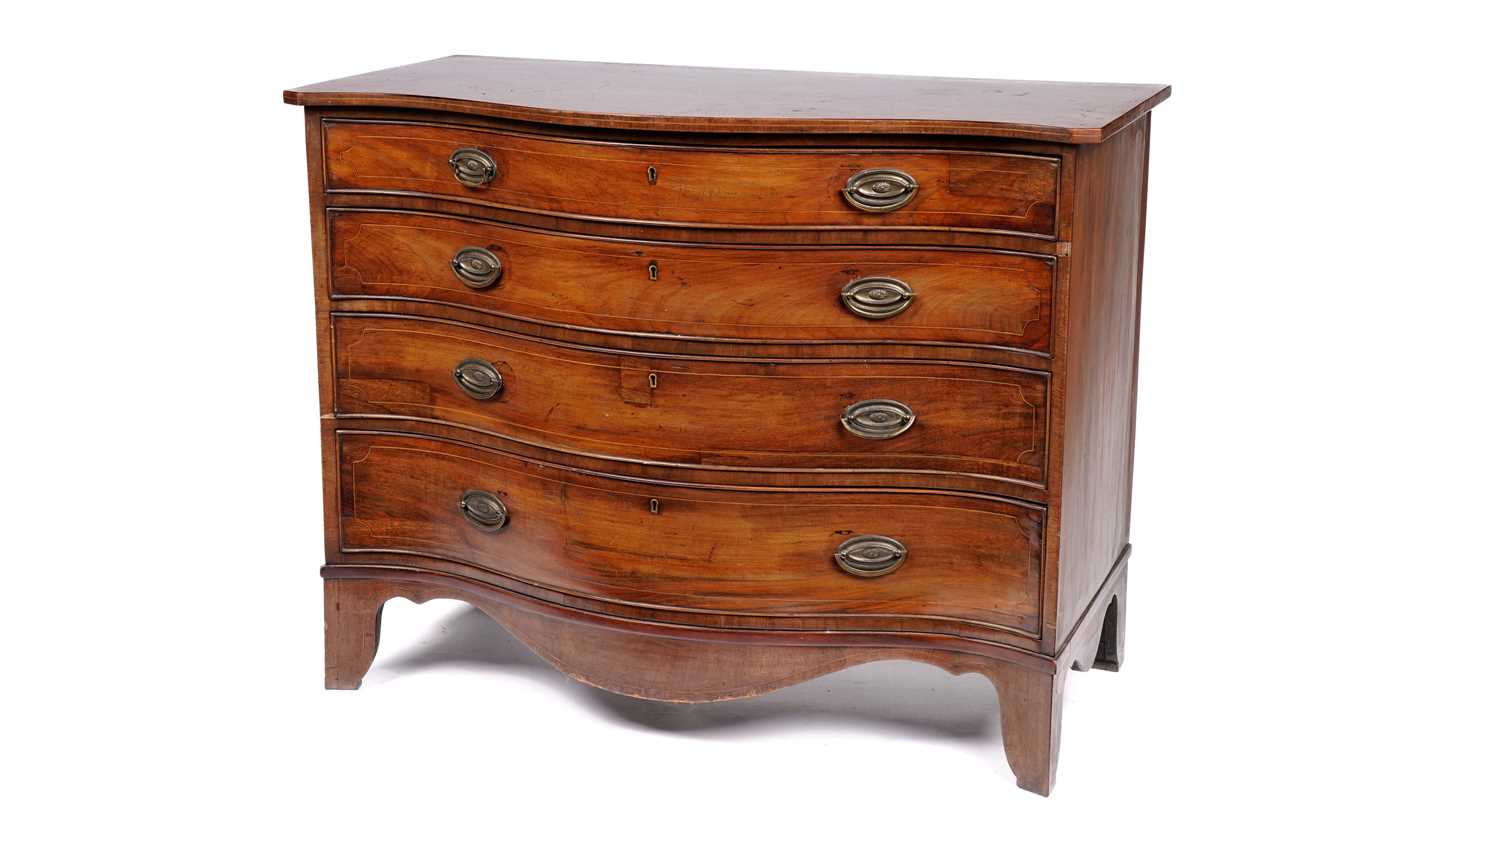 A George III mahogany serpentine-fronted chest of drawers